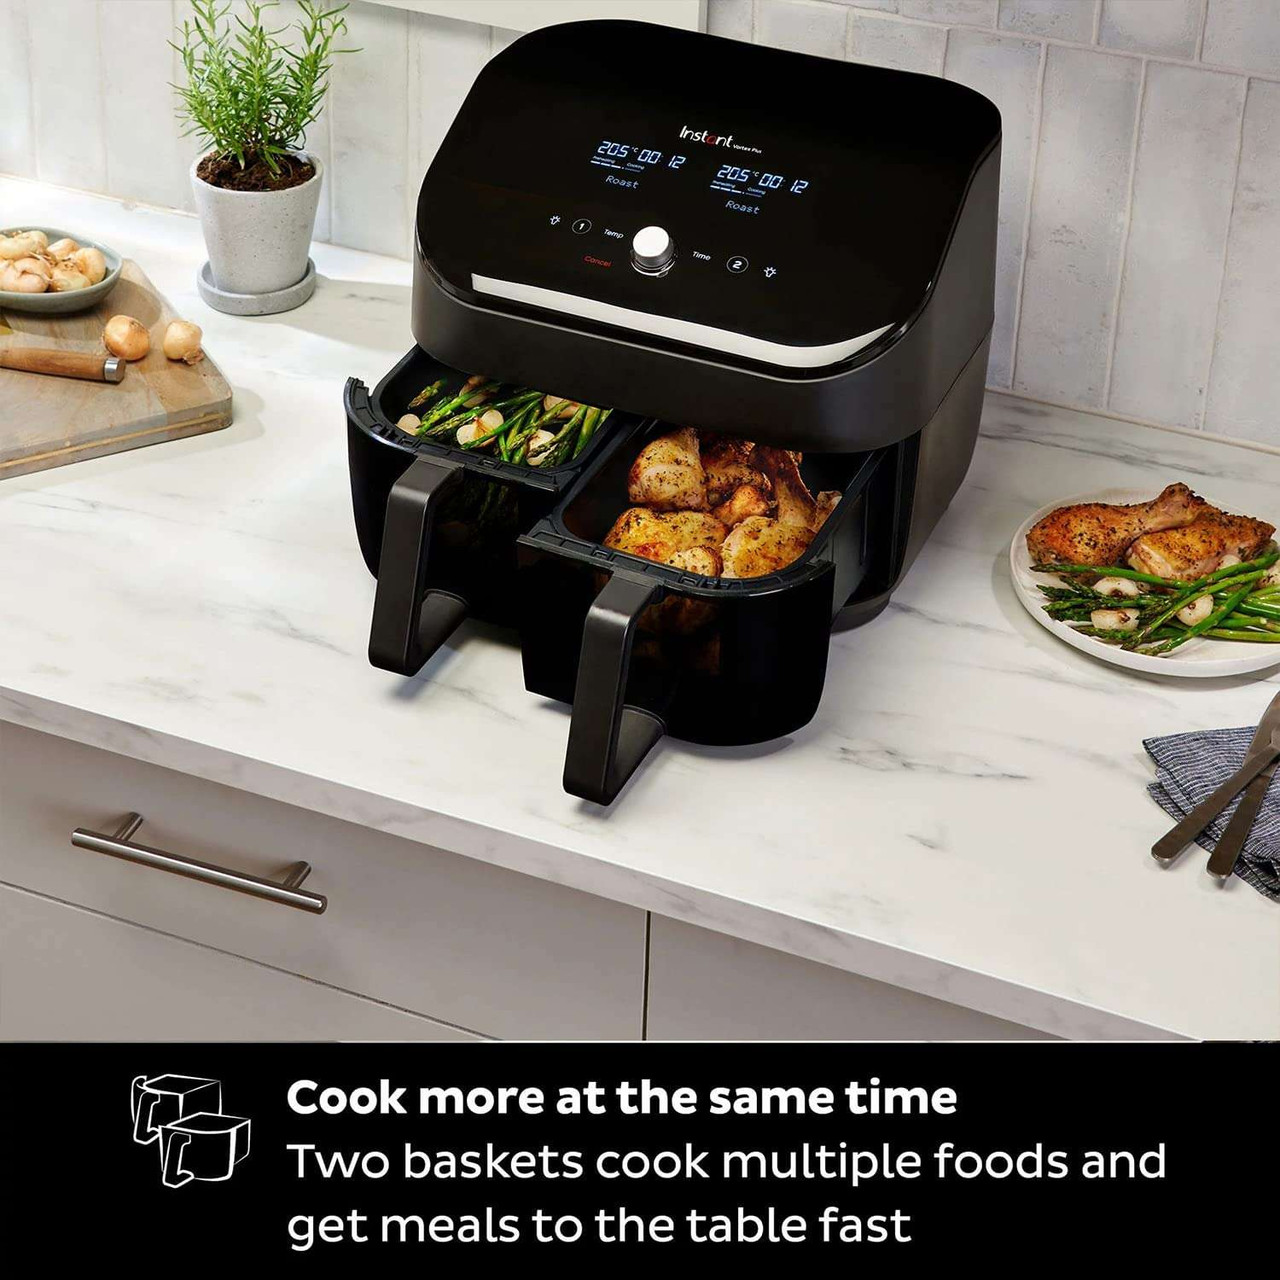 https://cdn11.bigcommerce.com/s-djdkawdsag/images/stencil/1280x1280/products/1177/3988/Instant-Vortex-Plus-Dual-Basket-with-ClearCook-76L-Digital-Health-Air-Fryer-Appliances-Frabco-Direct_3939__87849.1662204371.jpg?c=1&imbypass=on